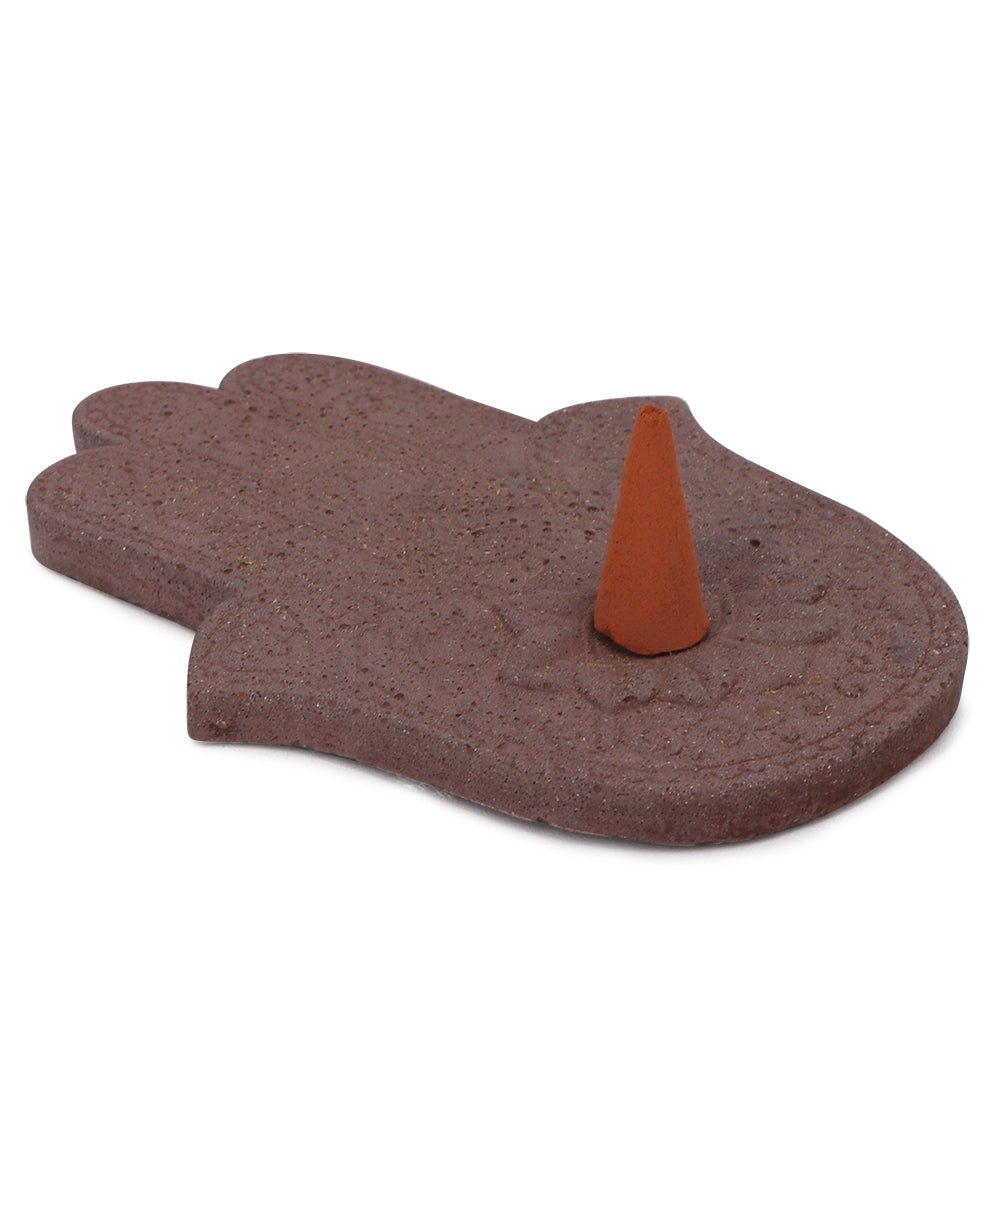 Concrete Hamsa Hand Stick, Cone, and Rope Incense Holder - Incense Holders